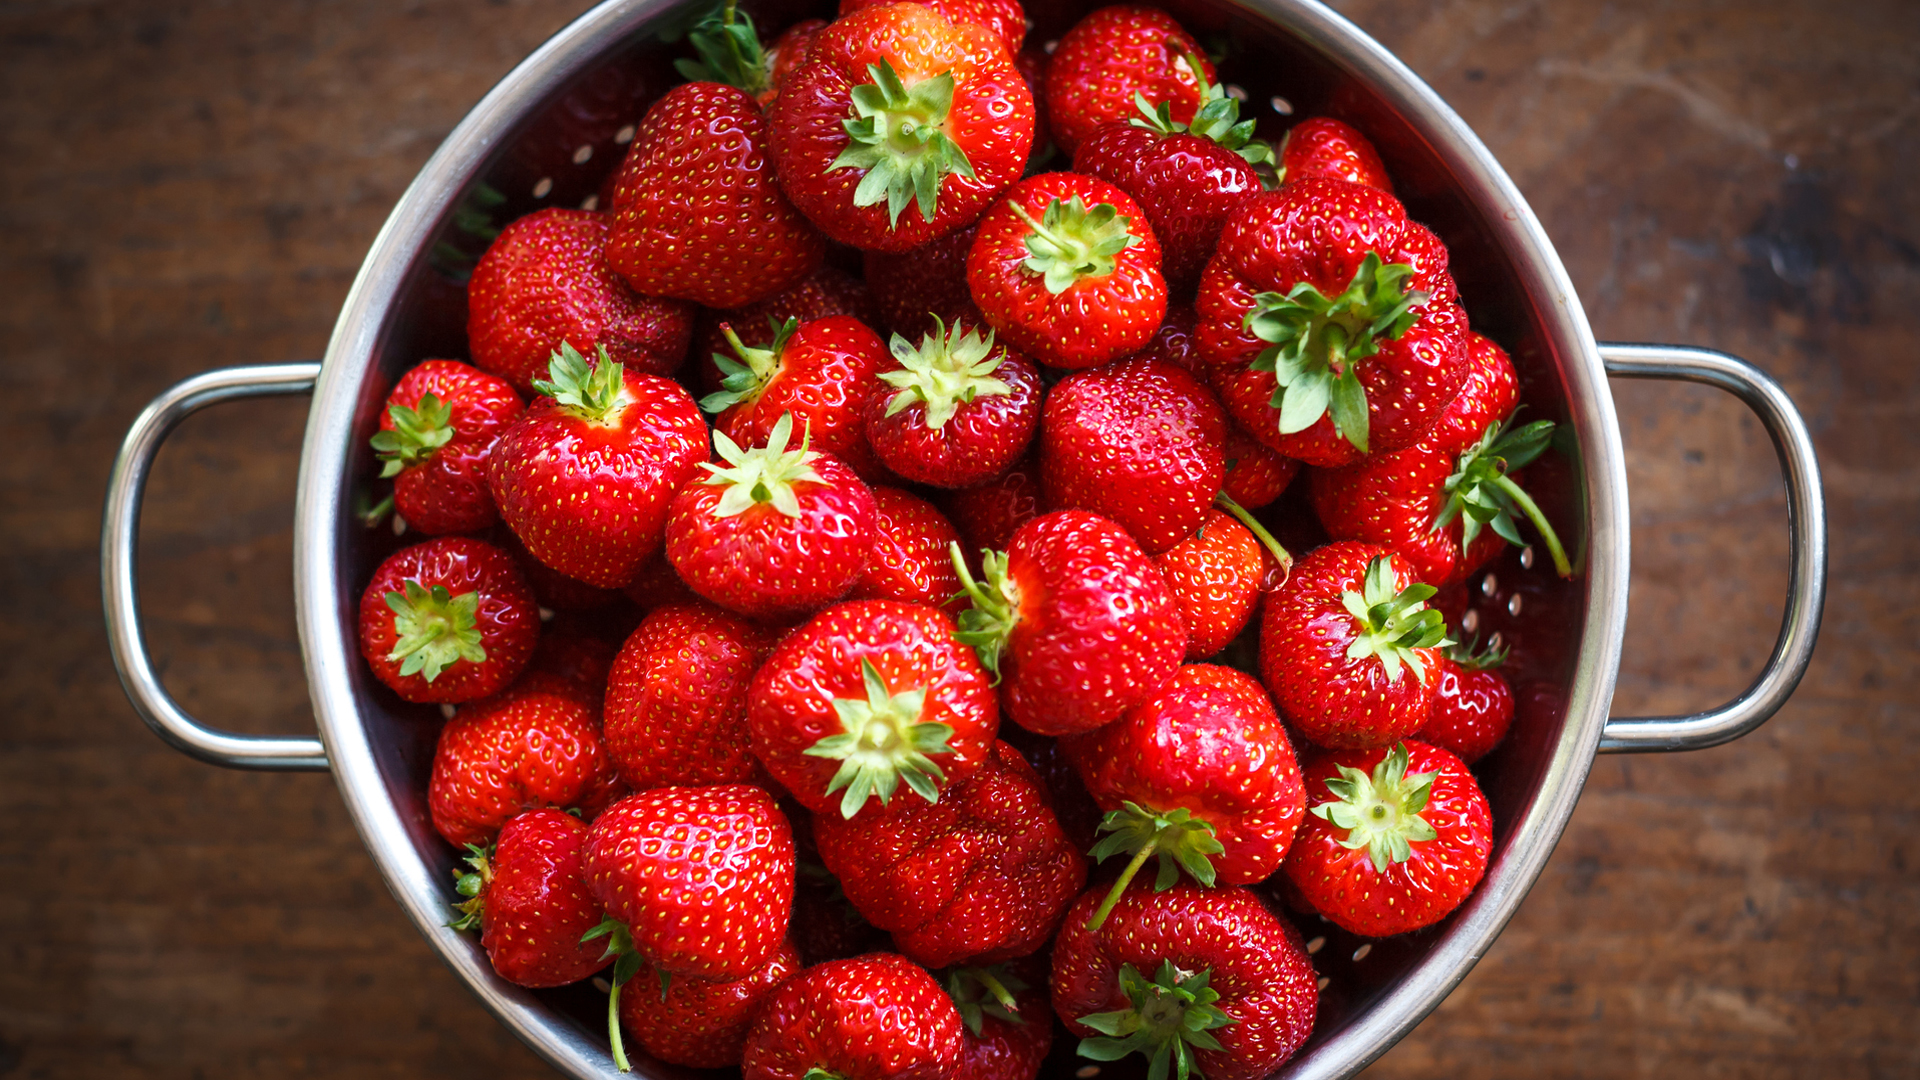 Strawberry is a good low sugar fruit